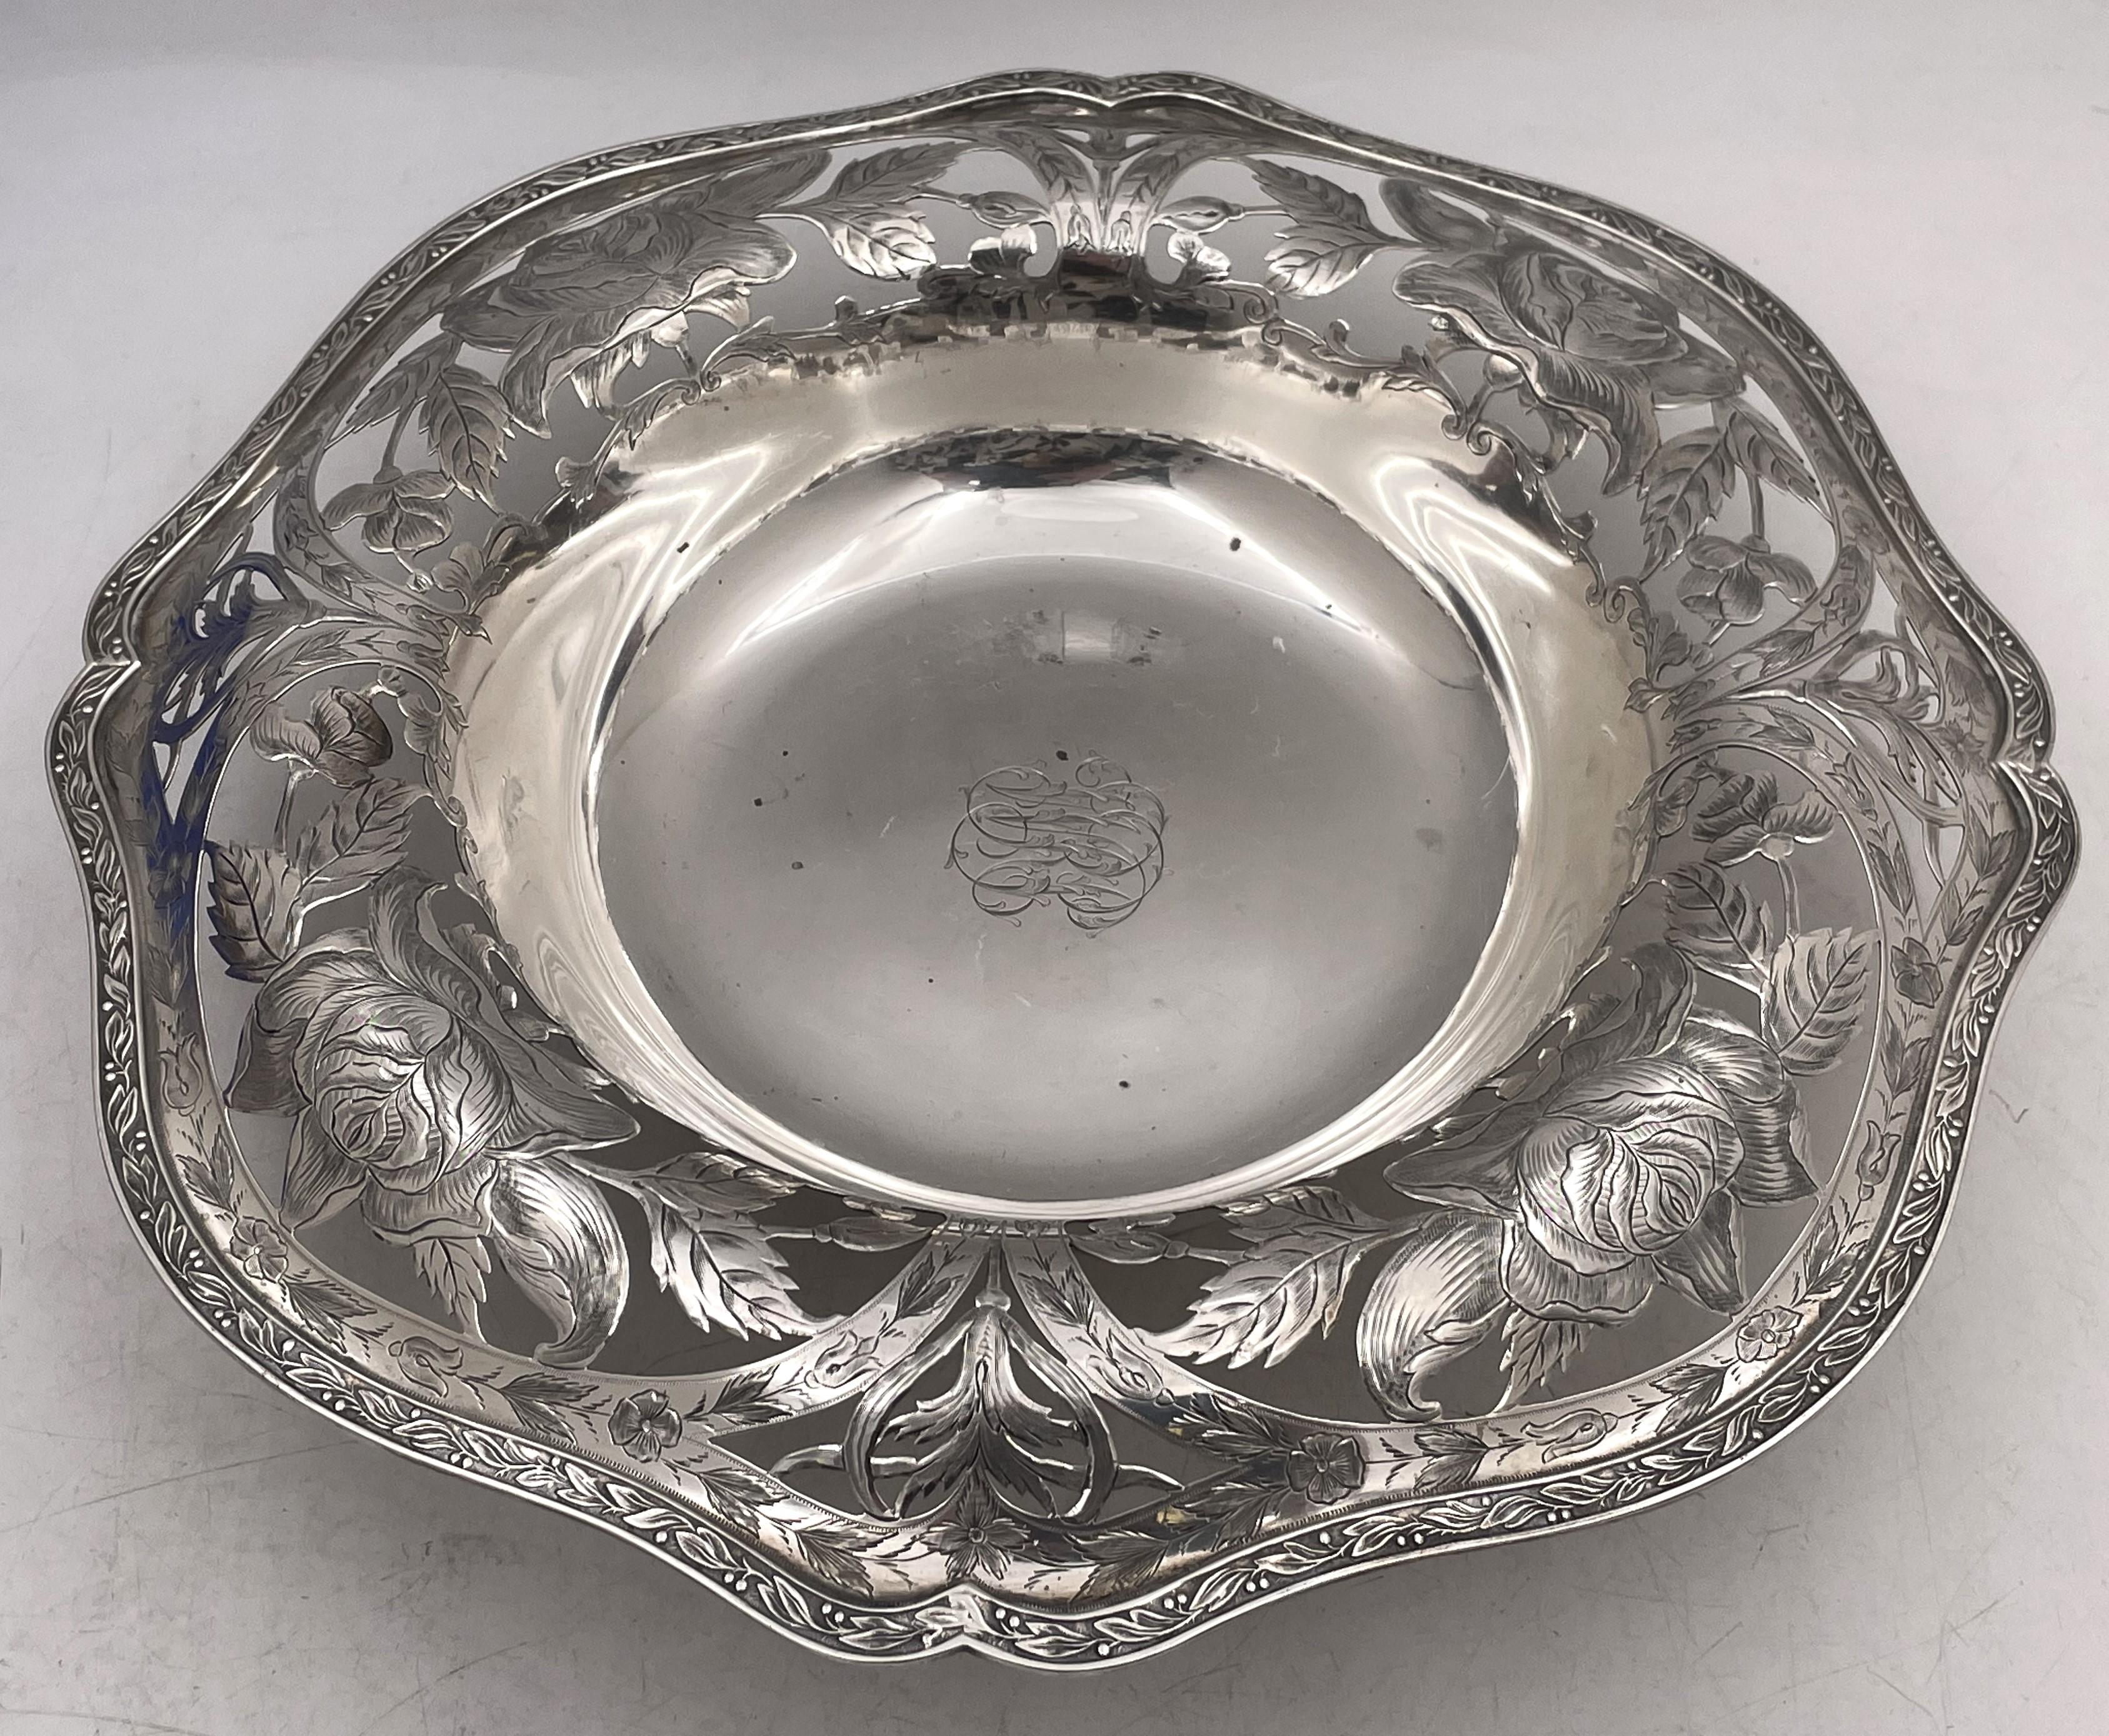 American Ludwig, Redlich & Co. Sterling Silver 1890s Centerpiece Bowl Art Nouveau Style For Sale